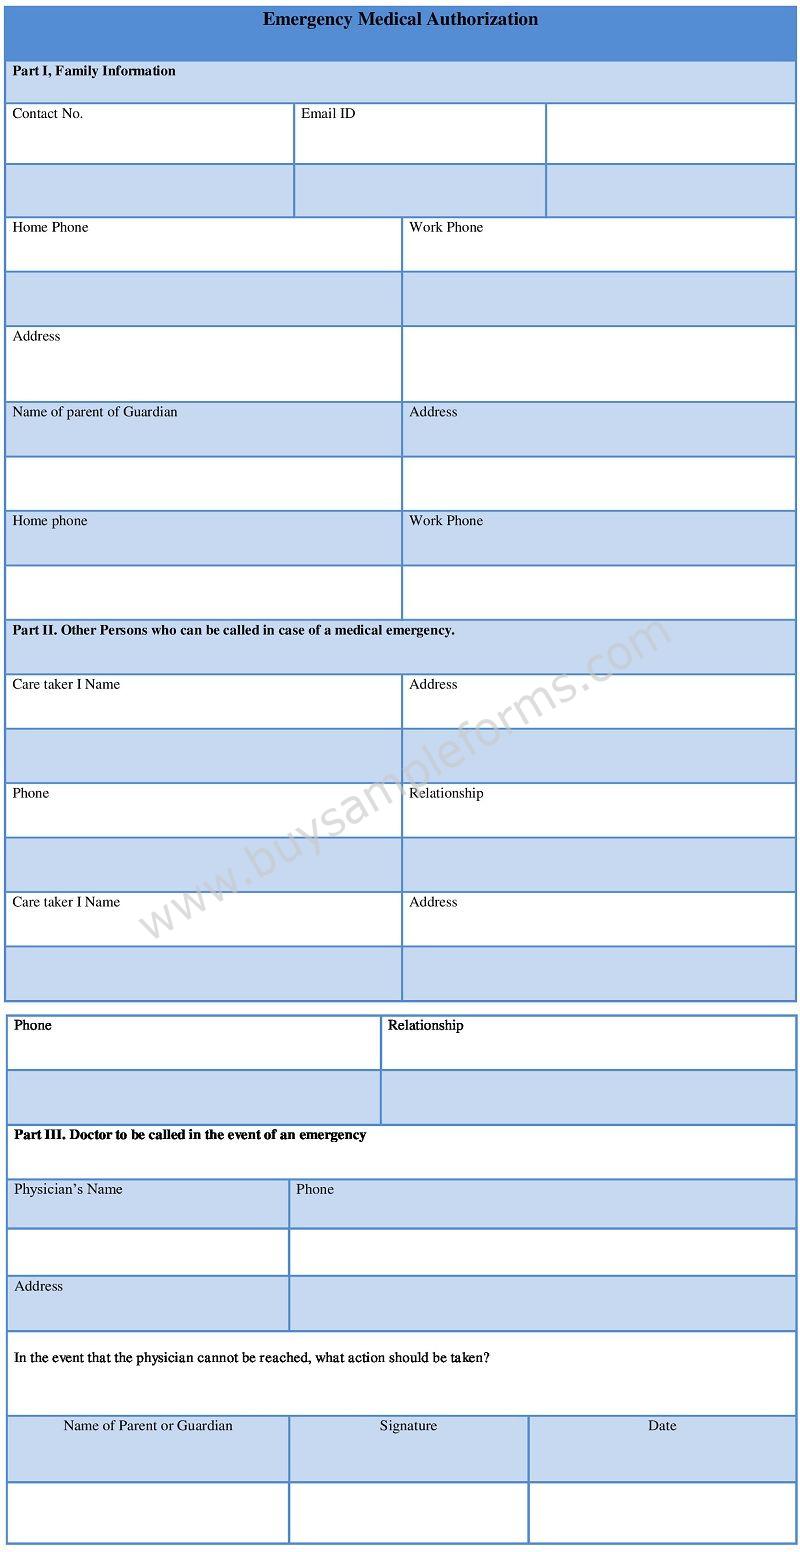 Emergency Medical Authorization Form Template